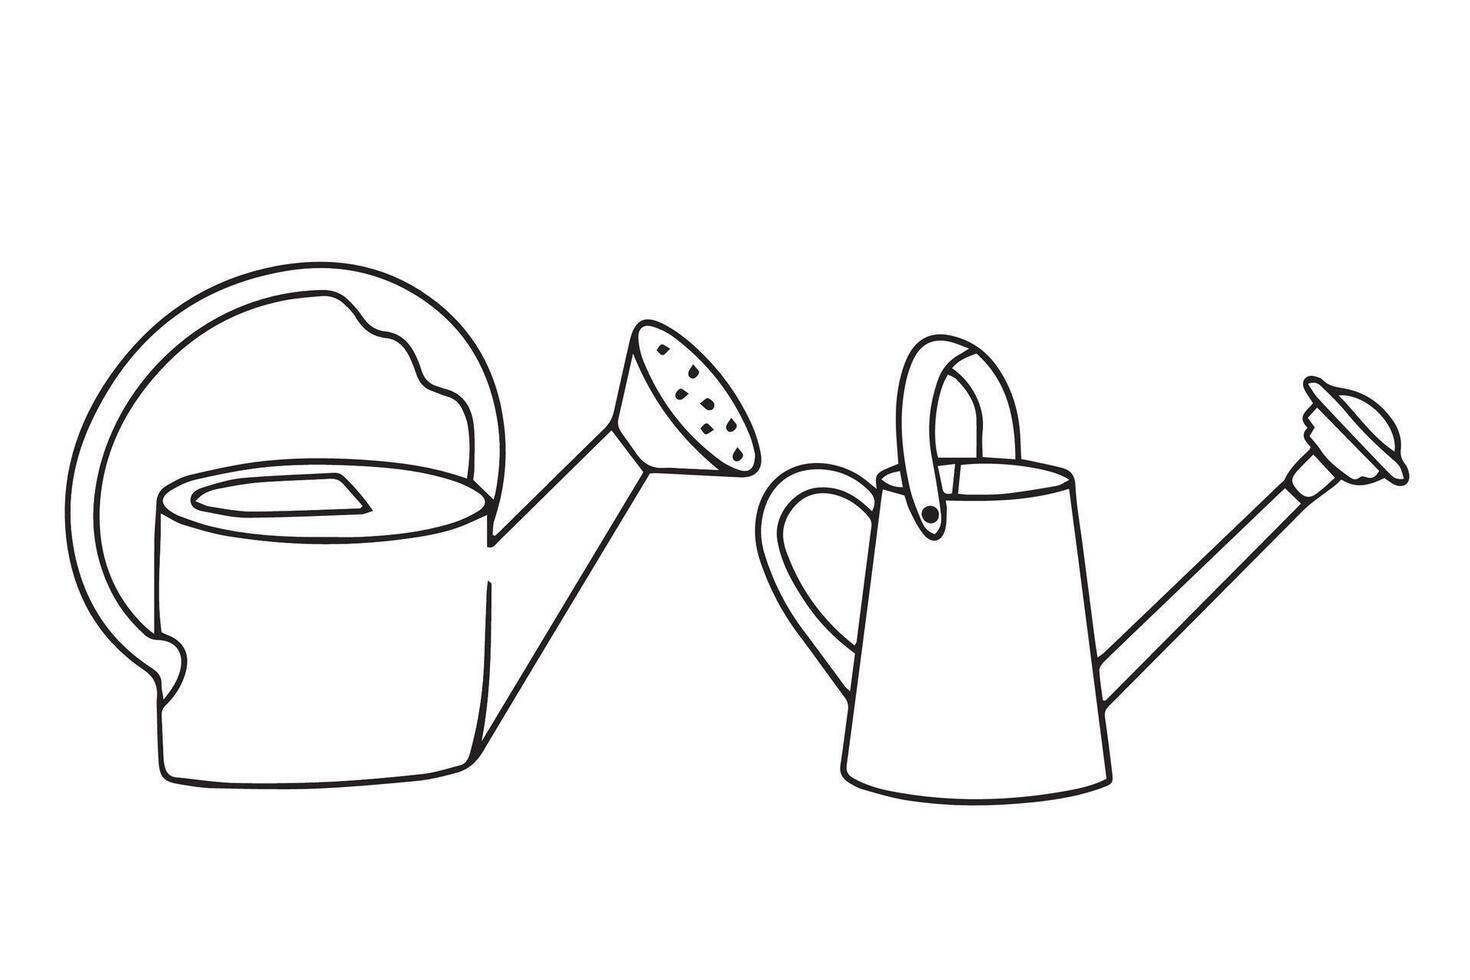 Garden watering cans in doodle style. Simple icons of watering cans. Hand-drawn outline of a watering can for the garden. Vector